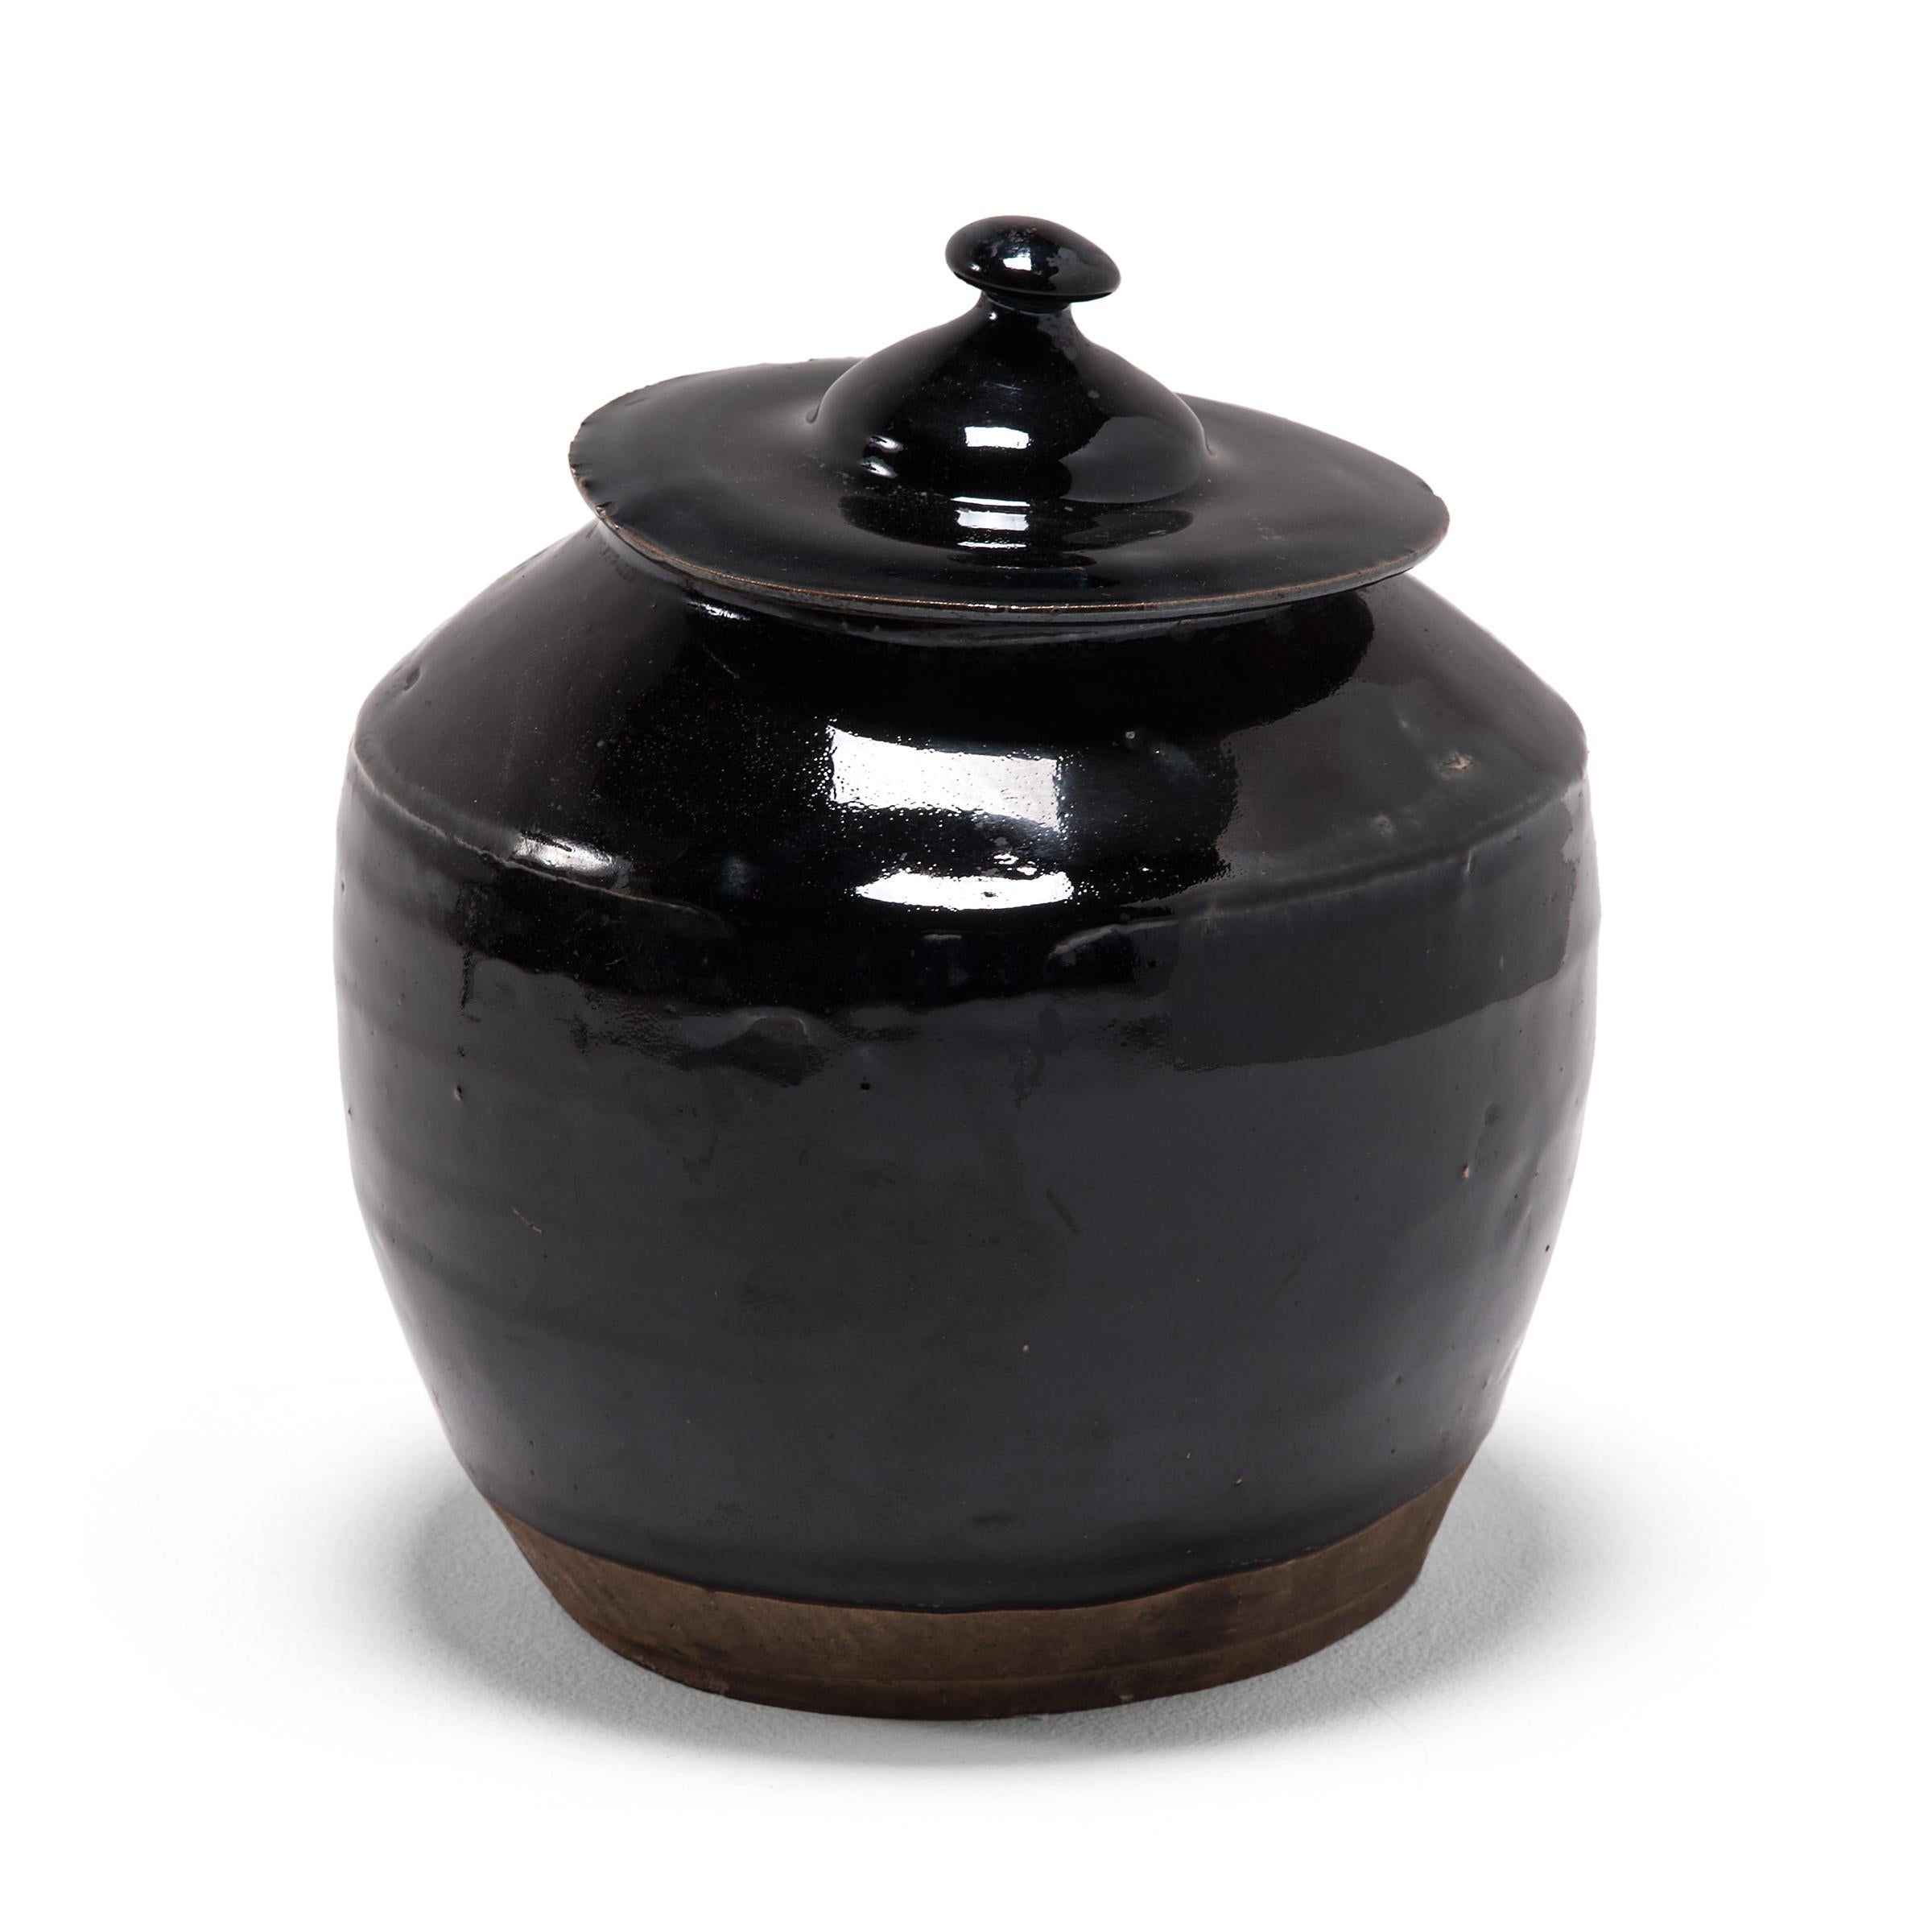 A dark glaze coats the rounded form of this squat kitchen vessel, cloaking the exterior with a glossy shine. The early 20th century jar was once used for storing food in a Qing-dynasty kitchen, as evidenced by its interior glaze. Dotted with